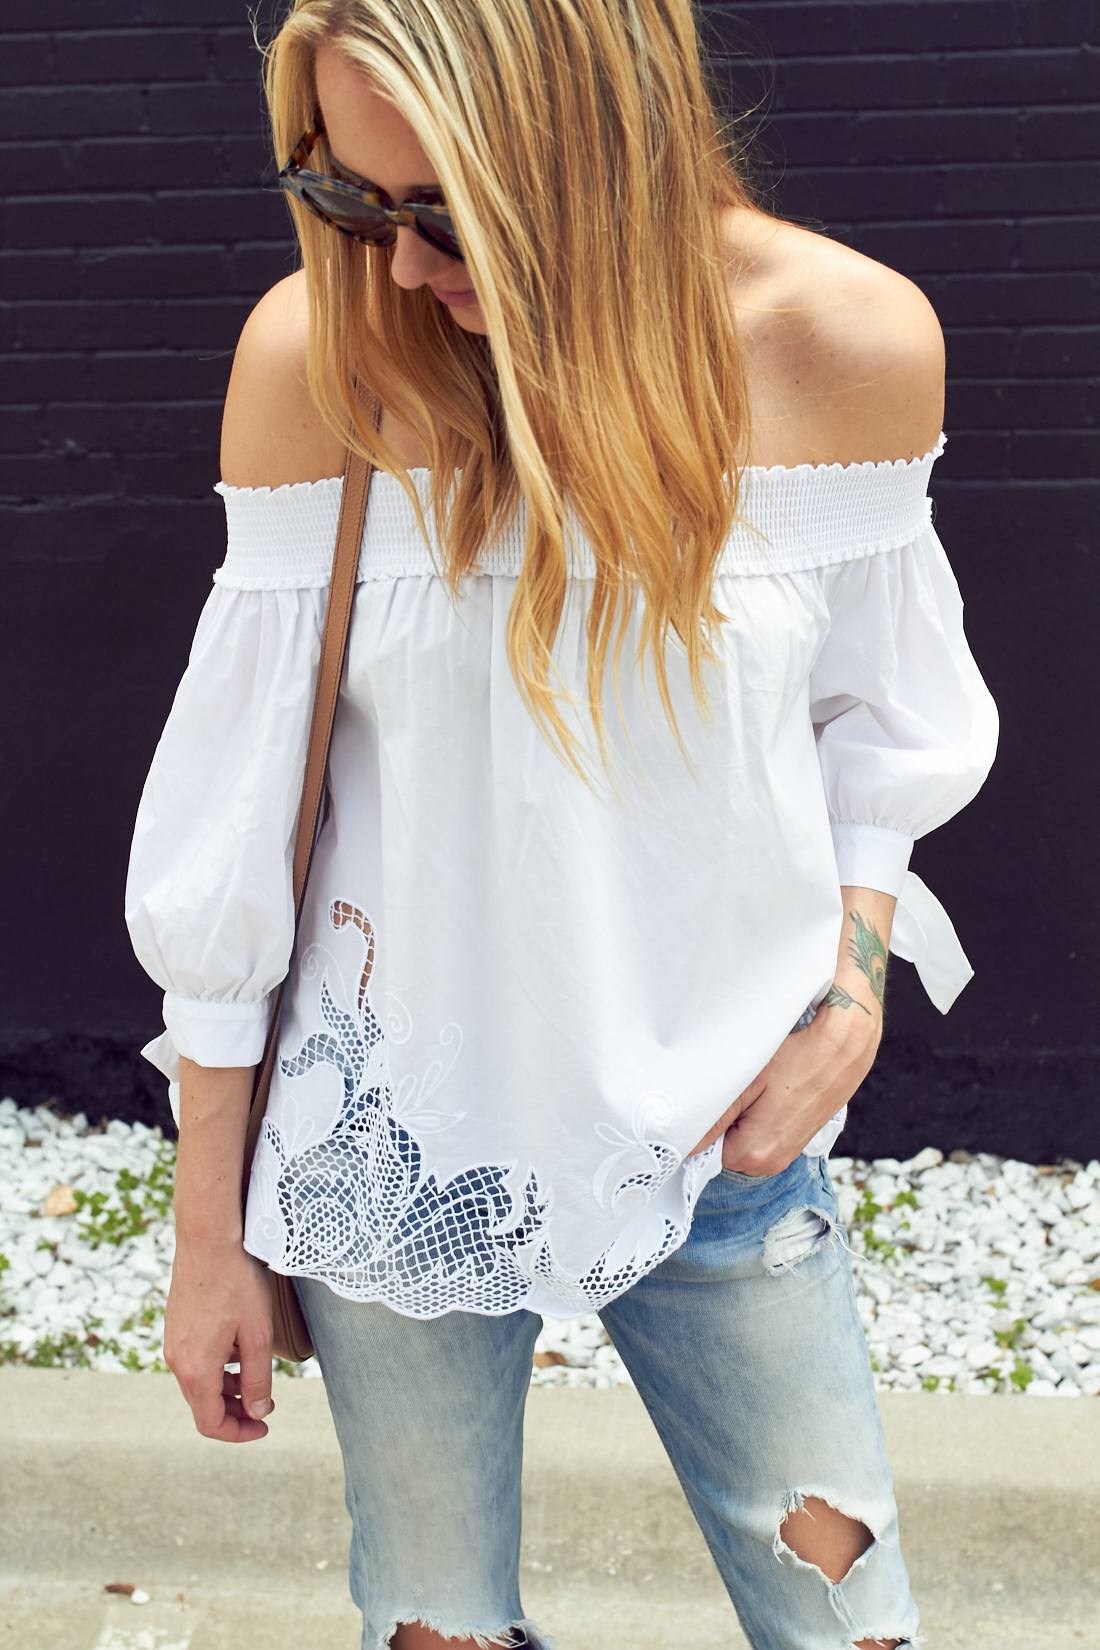 fashion-jackson-nordstrom-chelsea28-white-off-the-shoulder-cutout-top